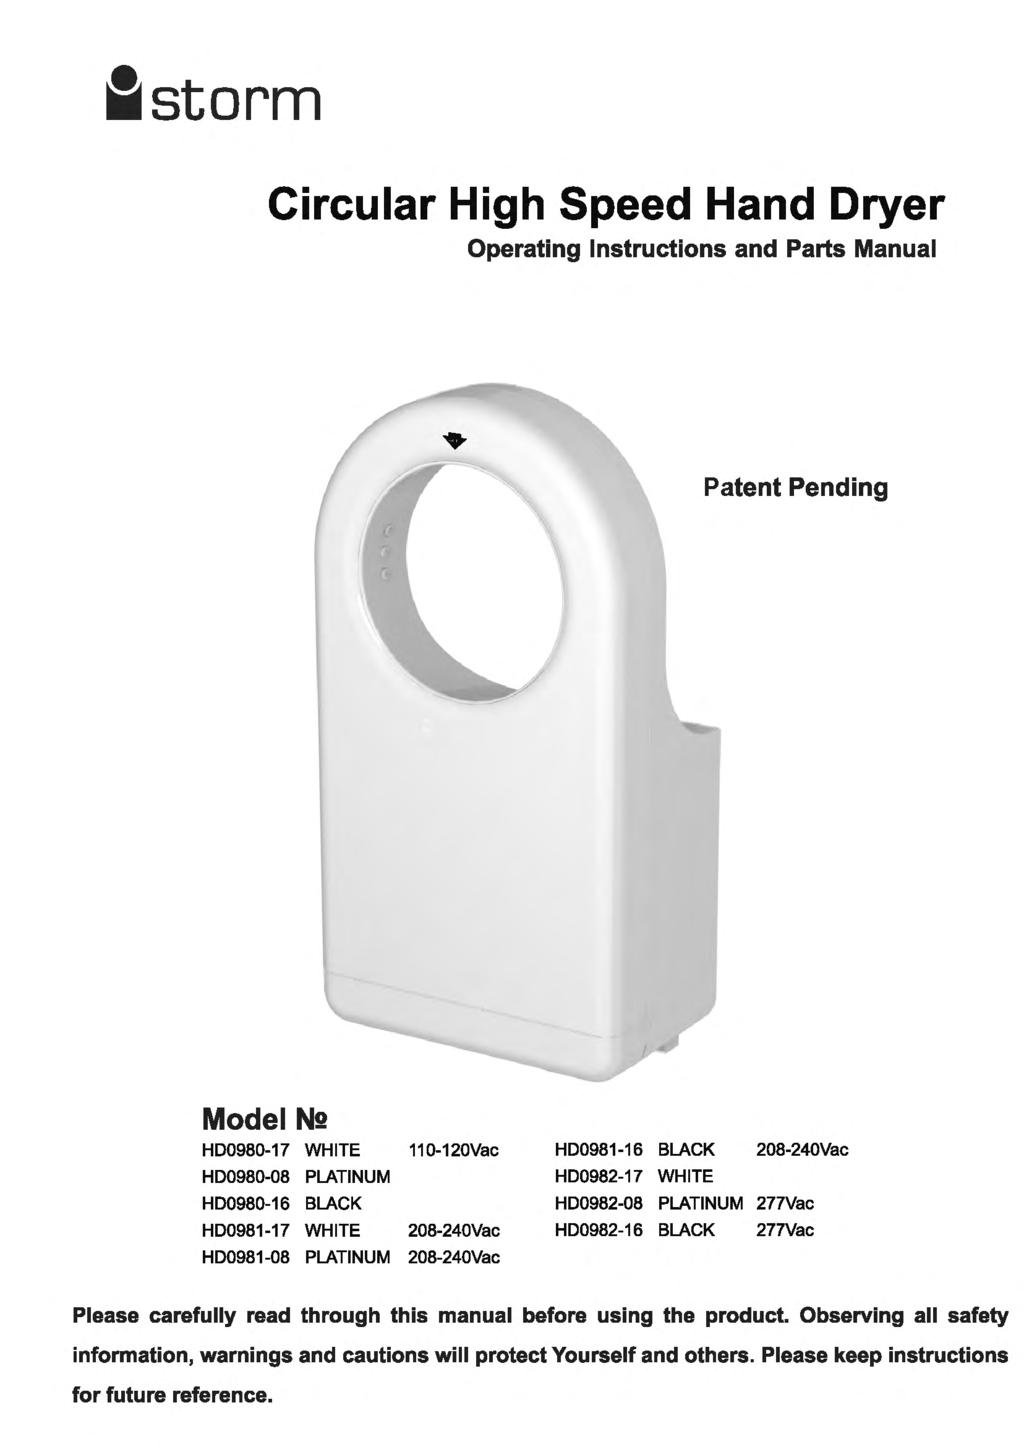 I storm Hand Dryer Circular High Speed Hand Dryer Operating Instructions and Parts Manual Patent